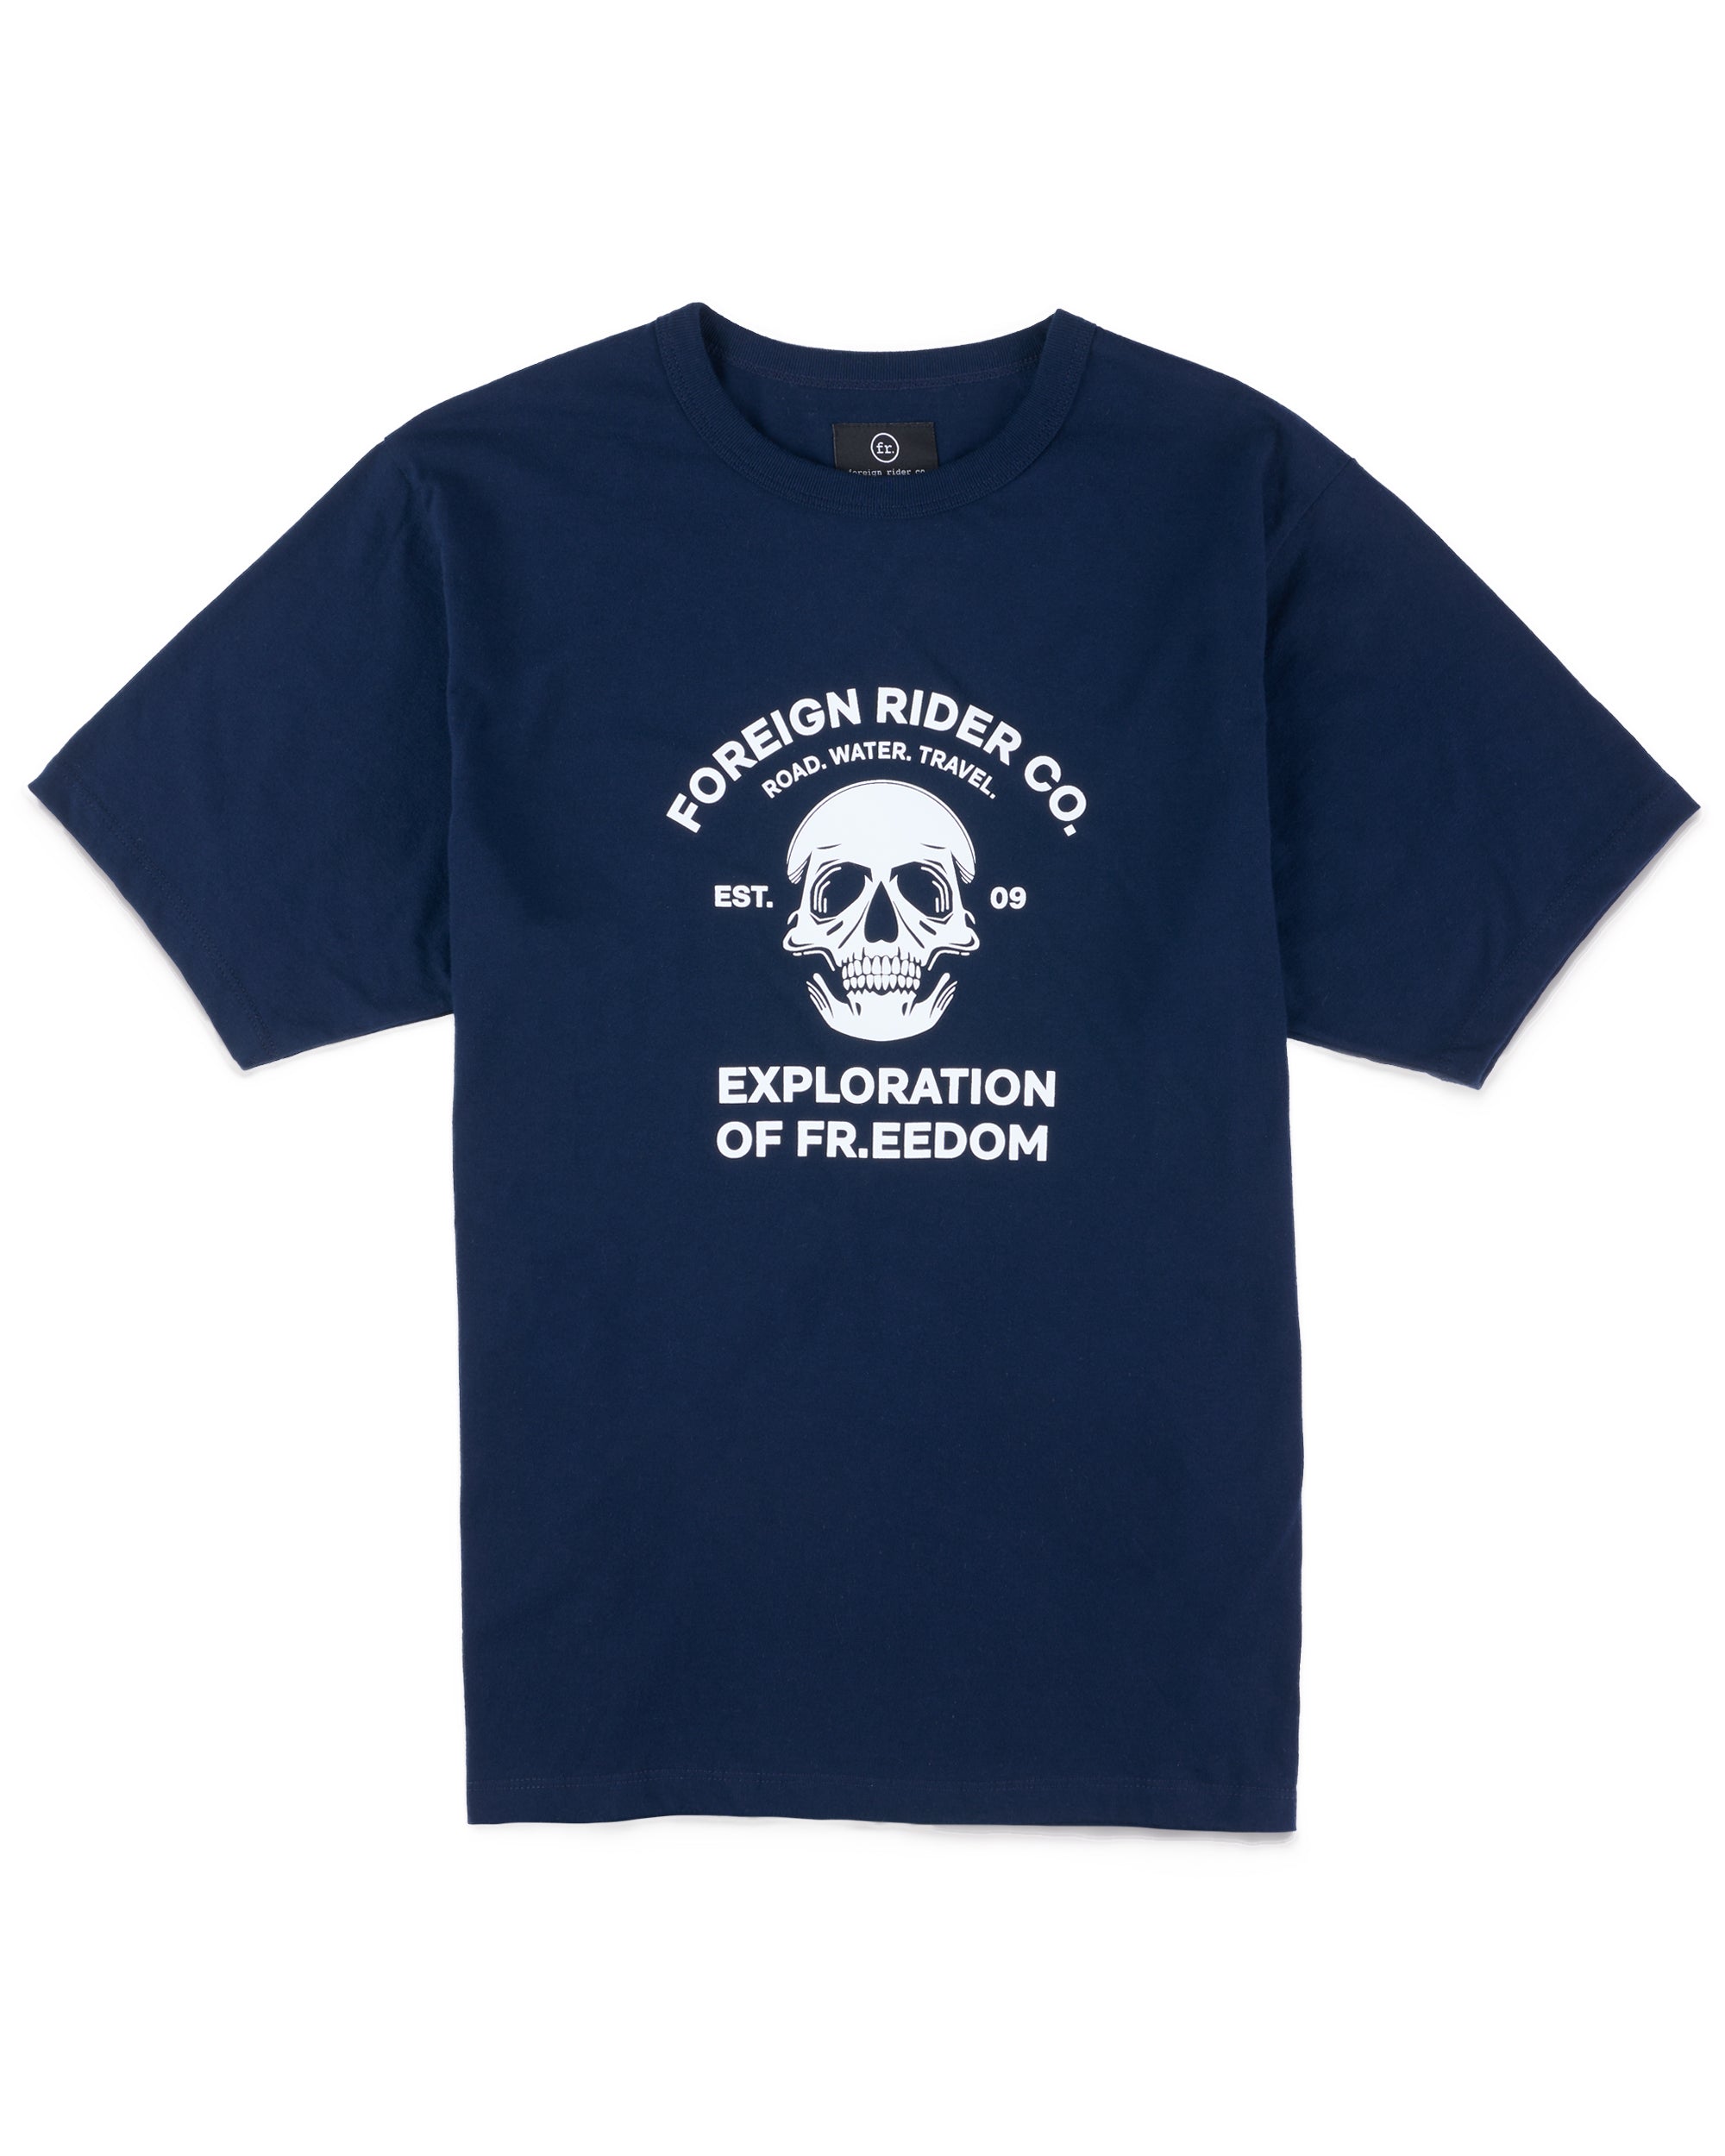 FR. Skull Graphic T-Shirt Navy - Foreign Rider Co.